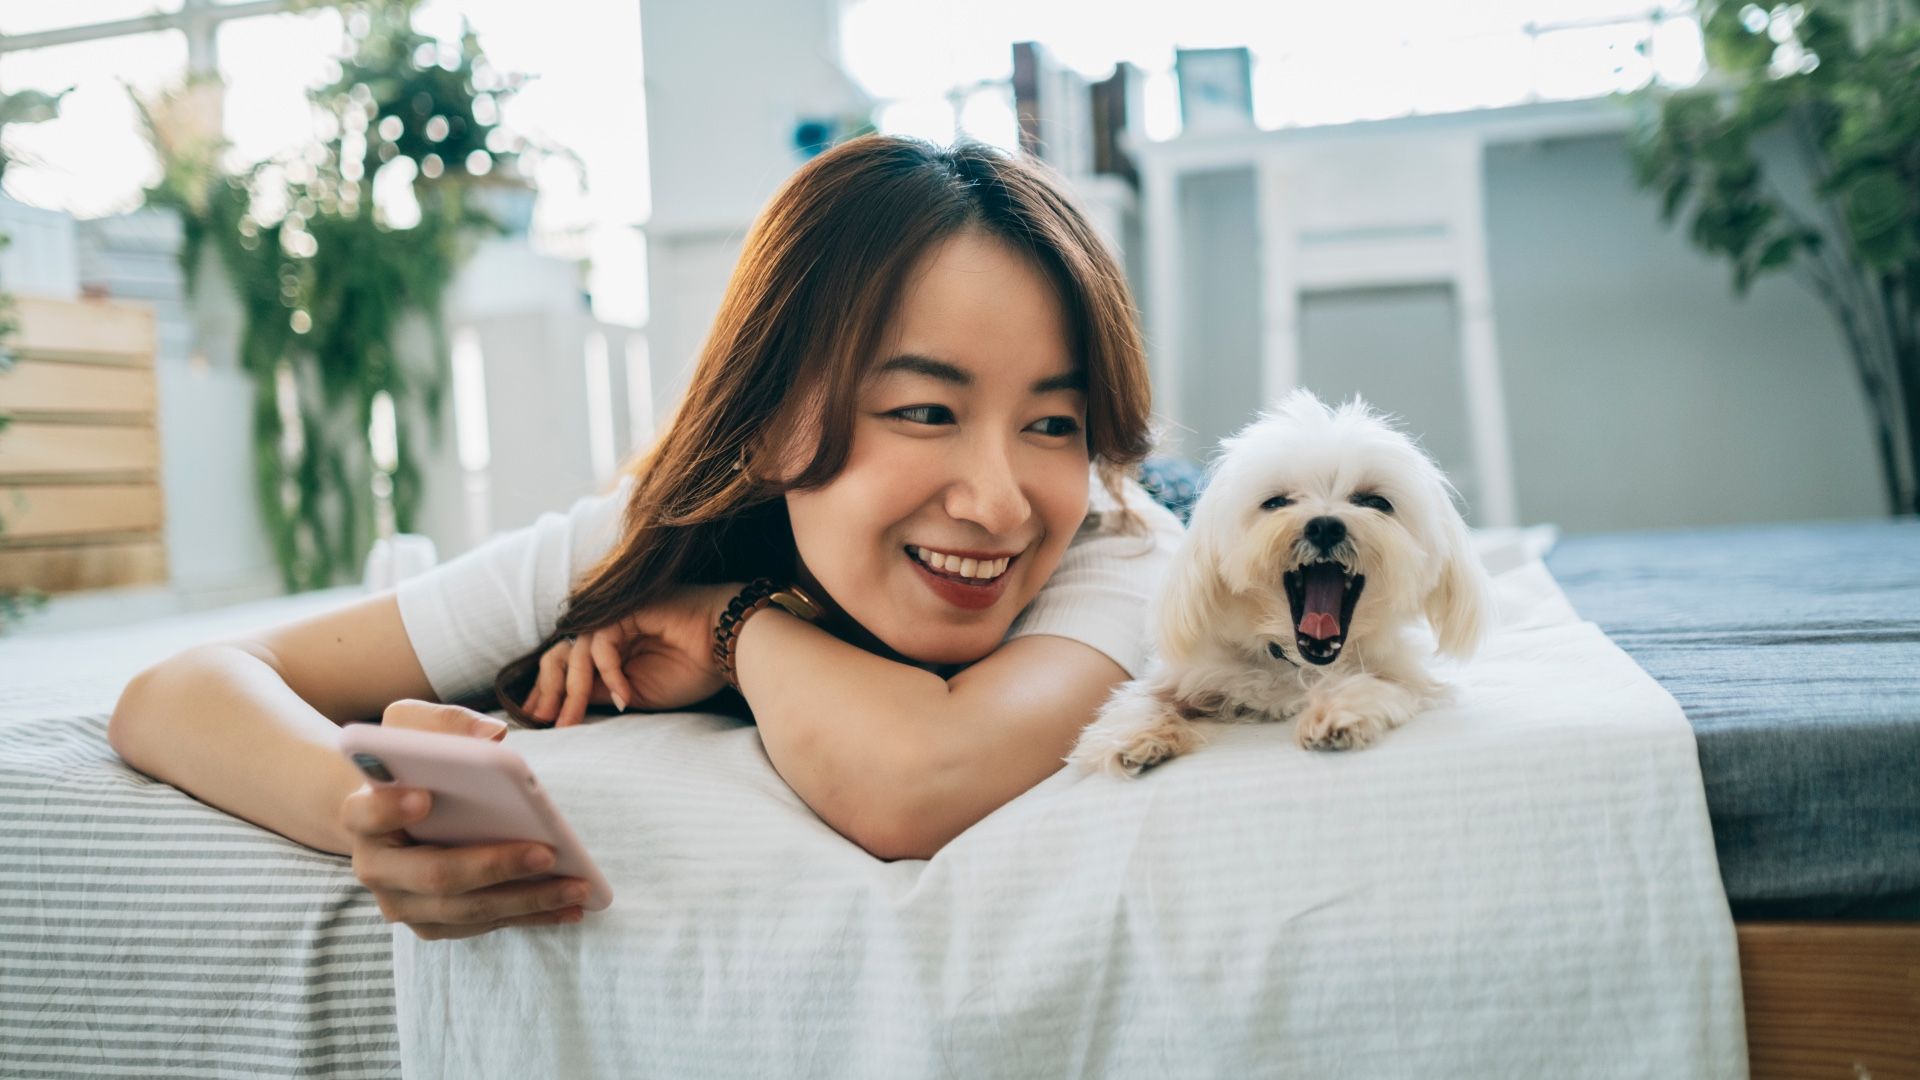 <p>                     The largest percentage of dogs (45%) sleep in their owner's bed according to the <a href="https://www.akc.org/expert-advice/lifestyle/where-do-dogs-sleep-at-night-infographic/" rel="nofollow">American Kennel Club</a>. 20% sleep in a crate, 17% in a dog crate and 14% in various places inside the house. 4% sleep in a shelter outdoors.                   </p>